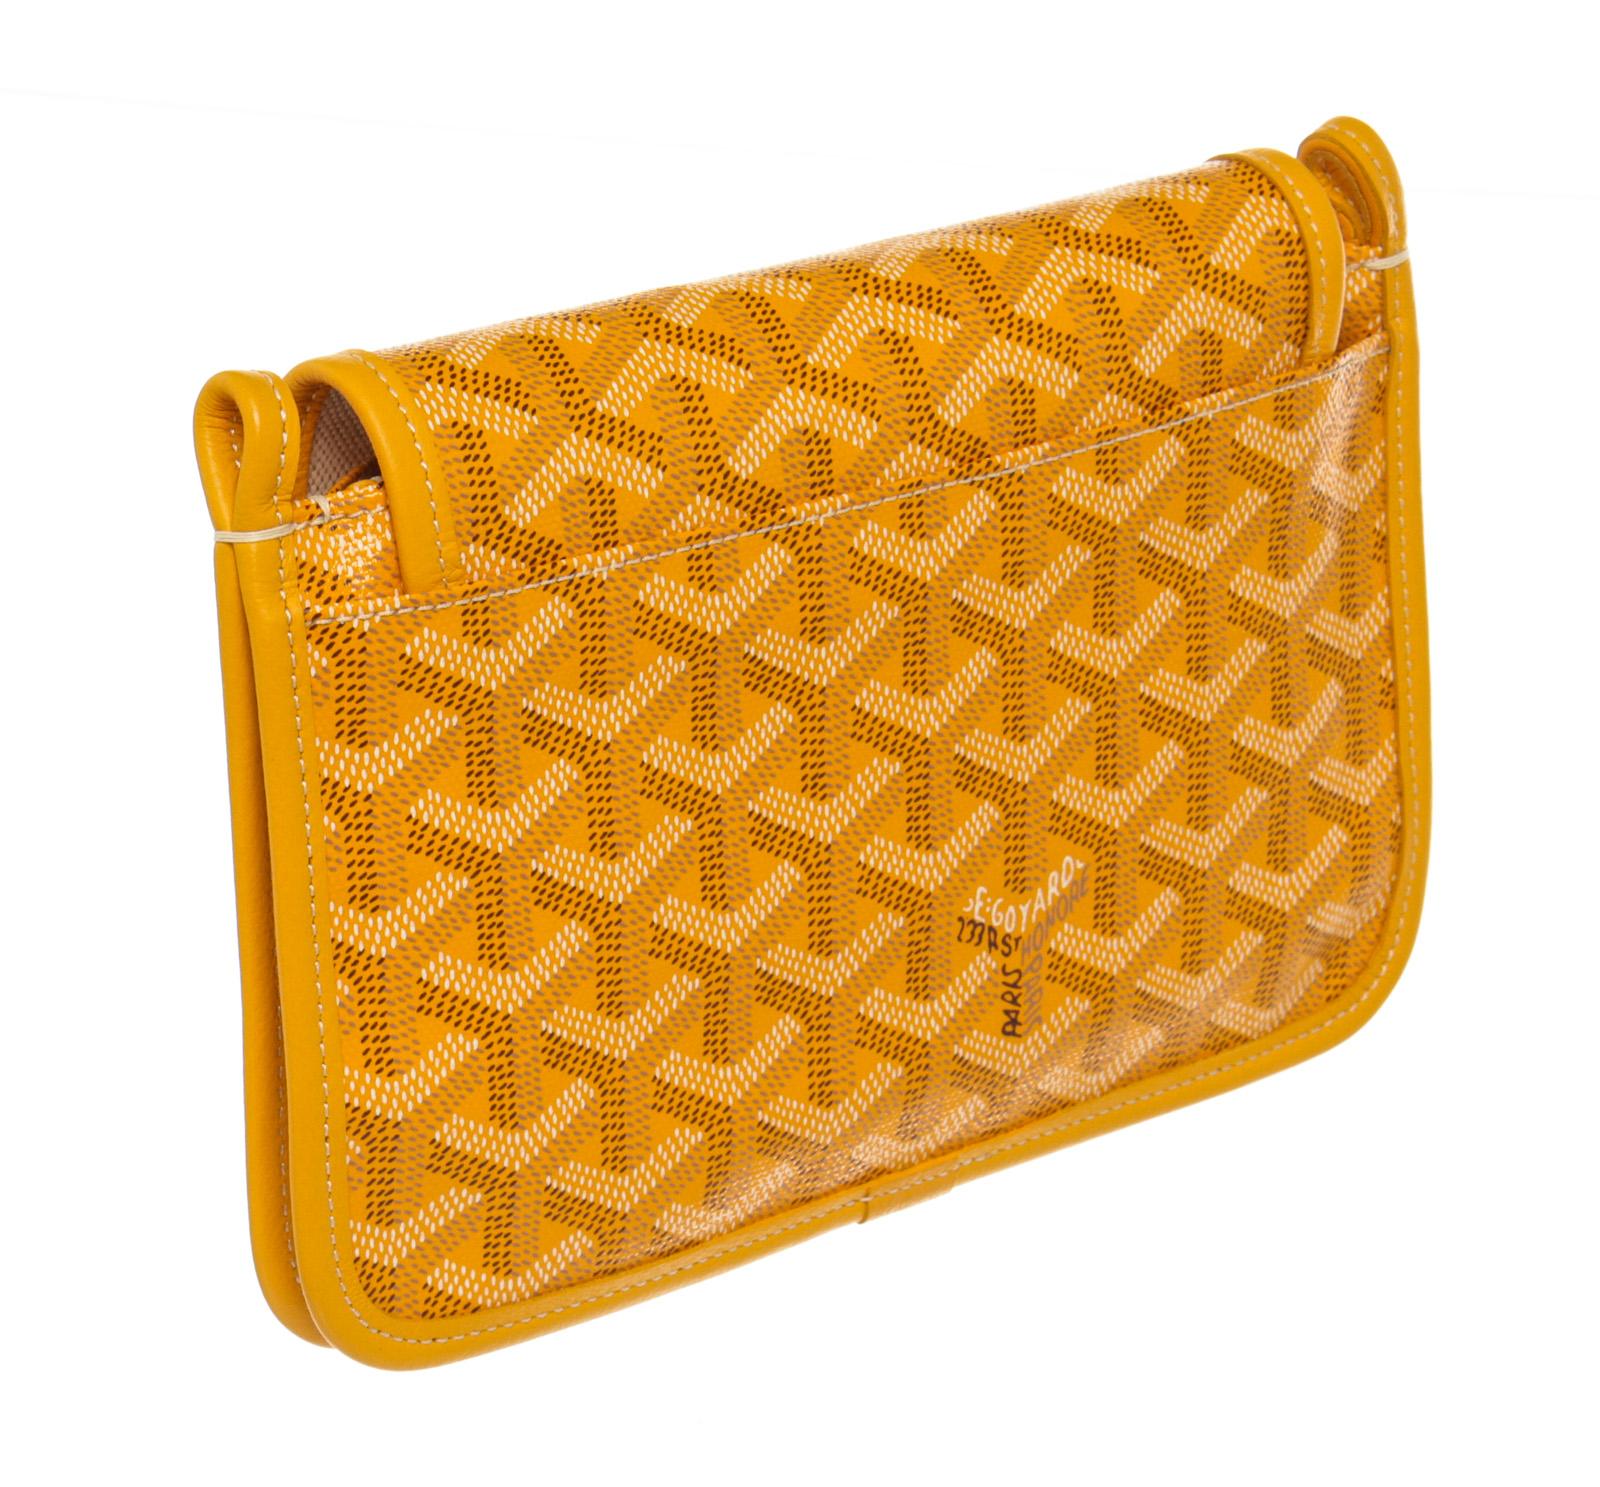 Goyard Orange Leather Plumet Wallet with leather, gold-tone hardware, trim leather, interior zip pockets, and snap closure.

220053MSC